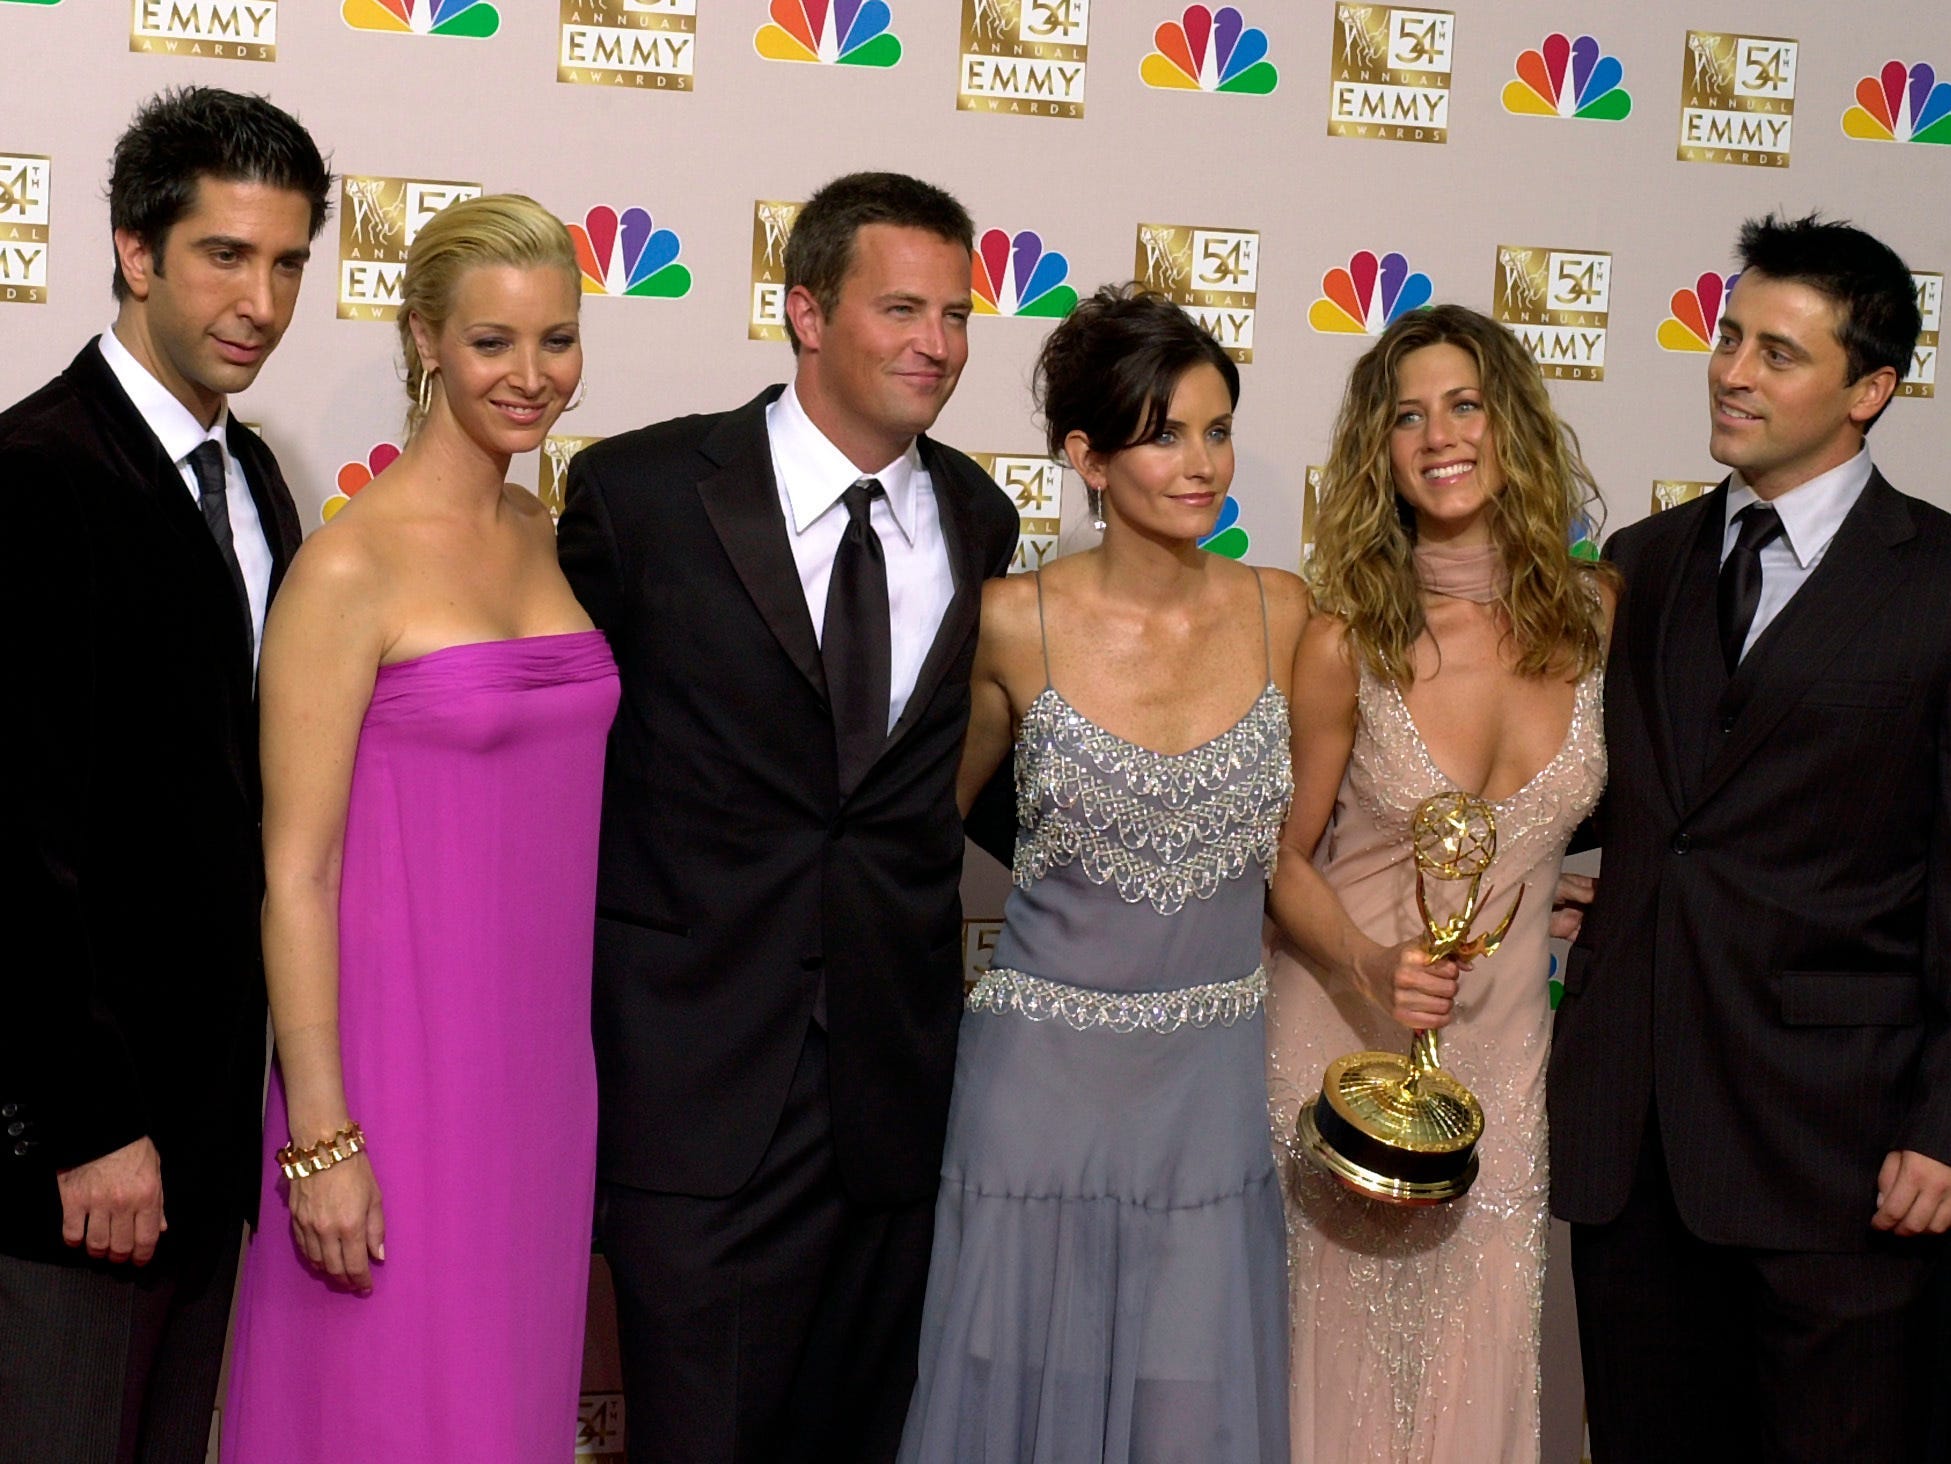 Friends broadcasted its first show in 1994.